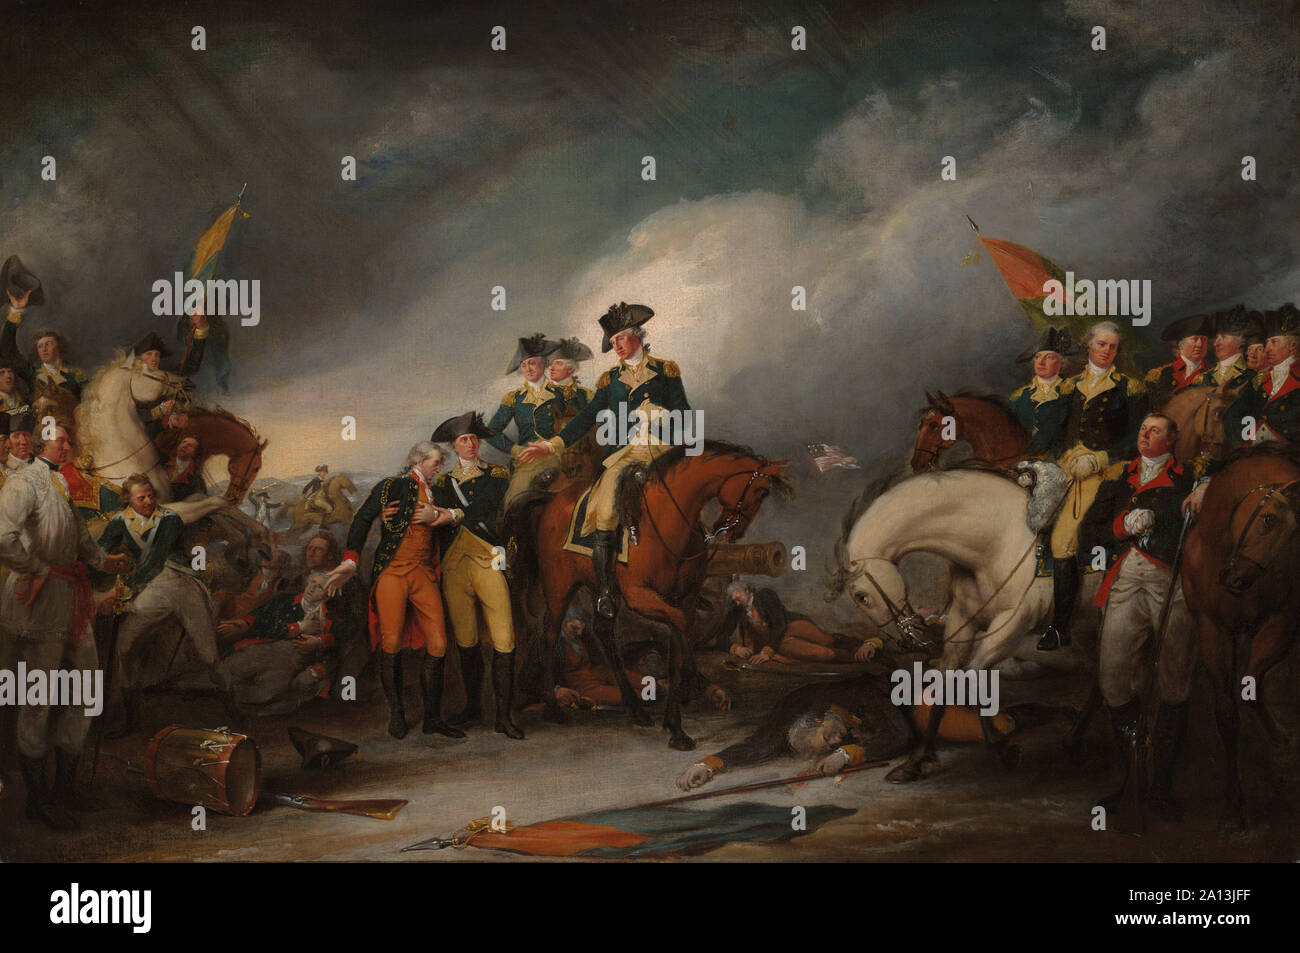 American Revolutionary War painting of The Capture of the Hessians at Trenton, December 26, 1776. Stock Photo